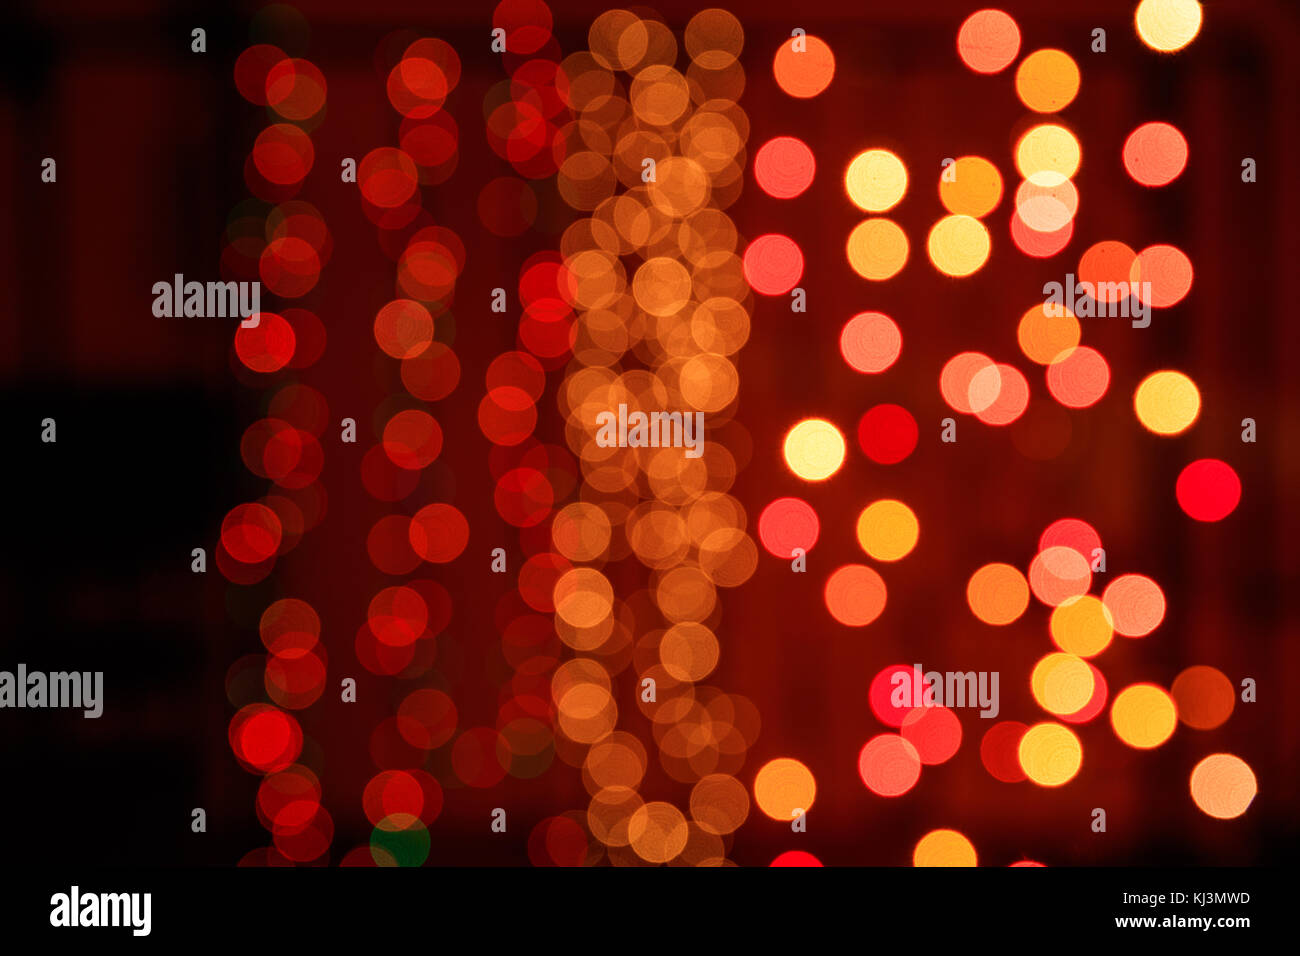 Christmas lights bokeh background. Orange, yellow and red lights on dark background Stock Photo